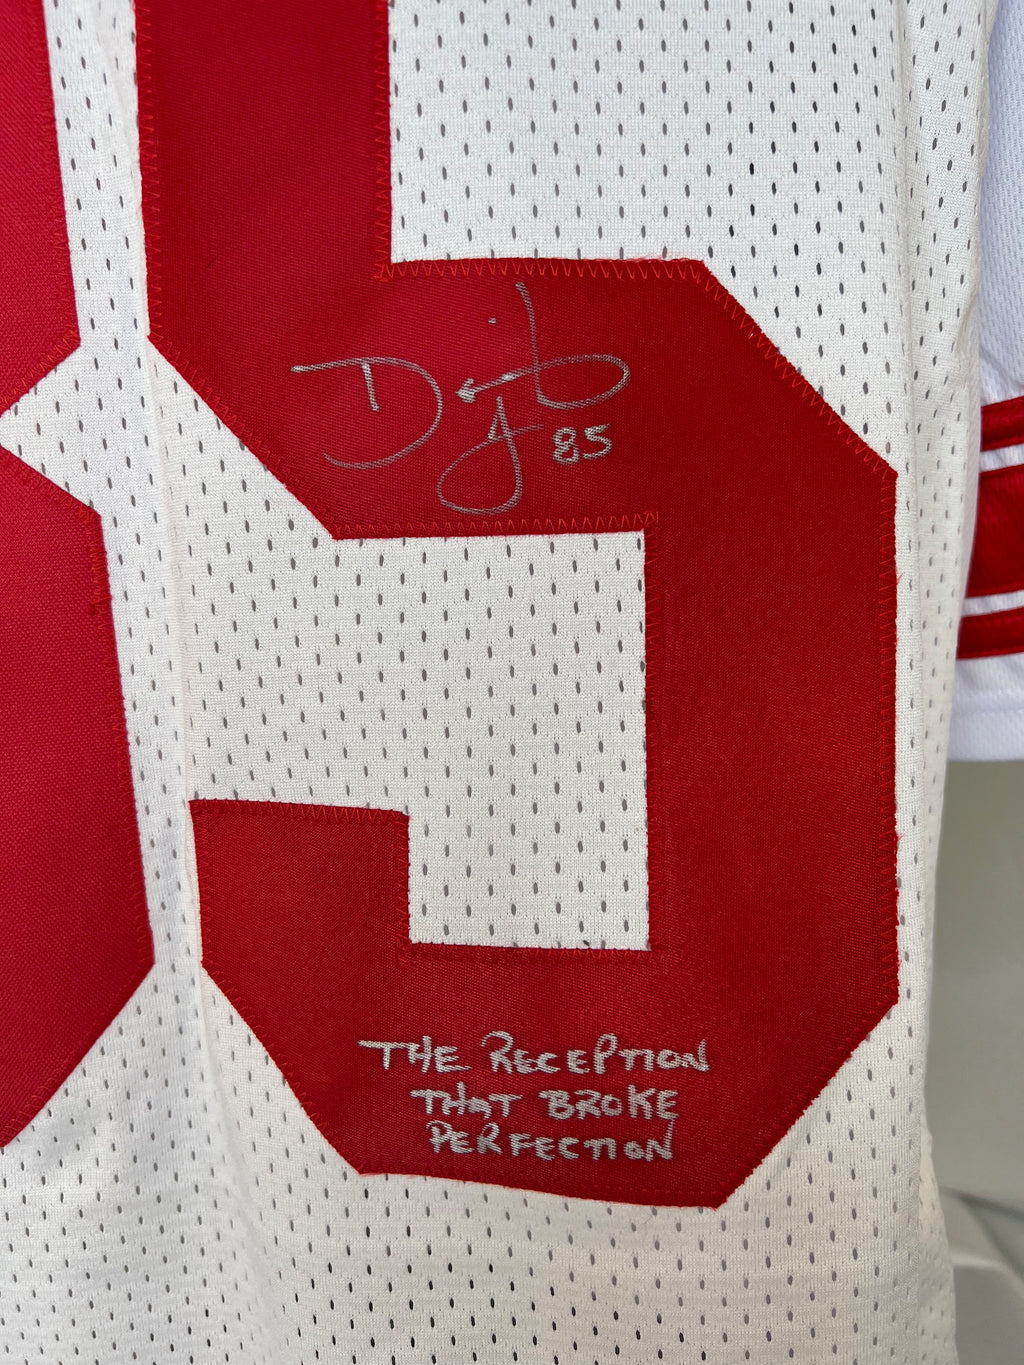 DAVID TYREE AUTOGRAPHED SIGNED INSCRIBED WHITE PRO STYLE JERSEY JSA COA